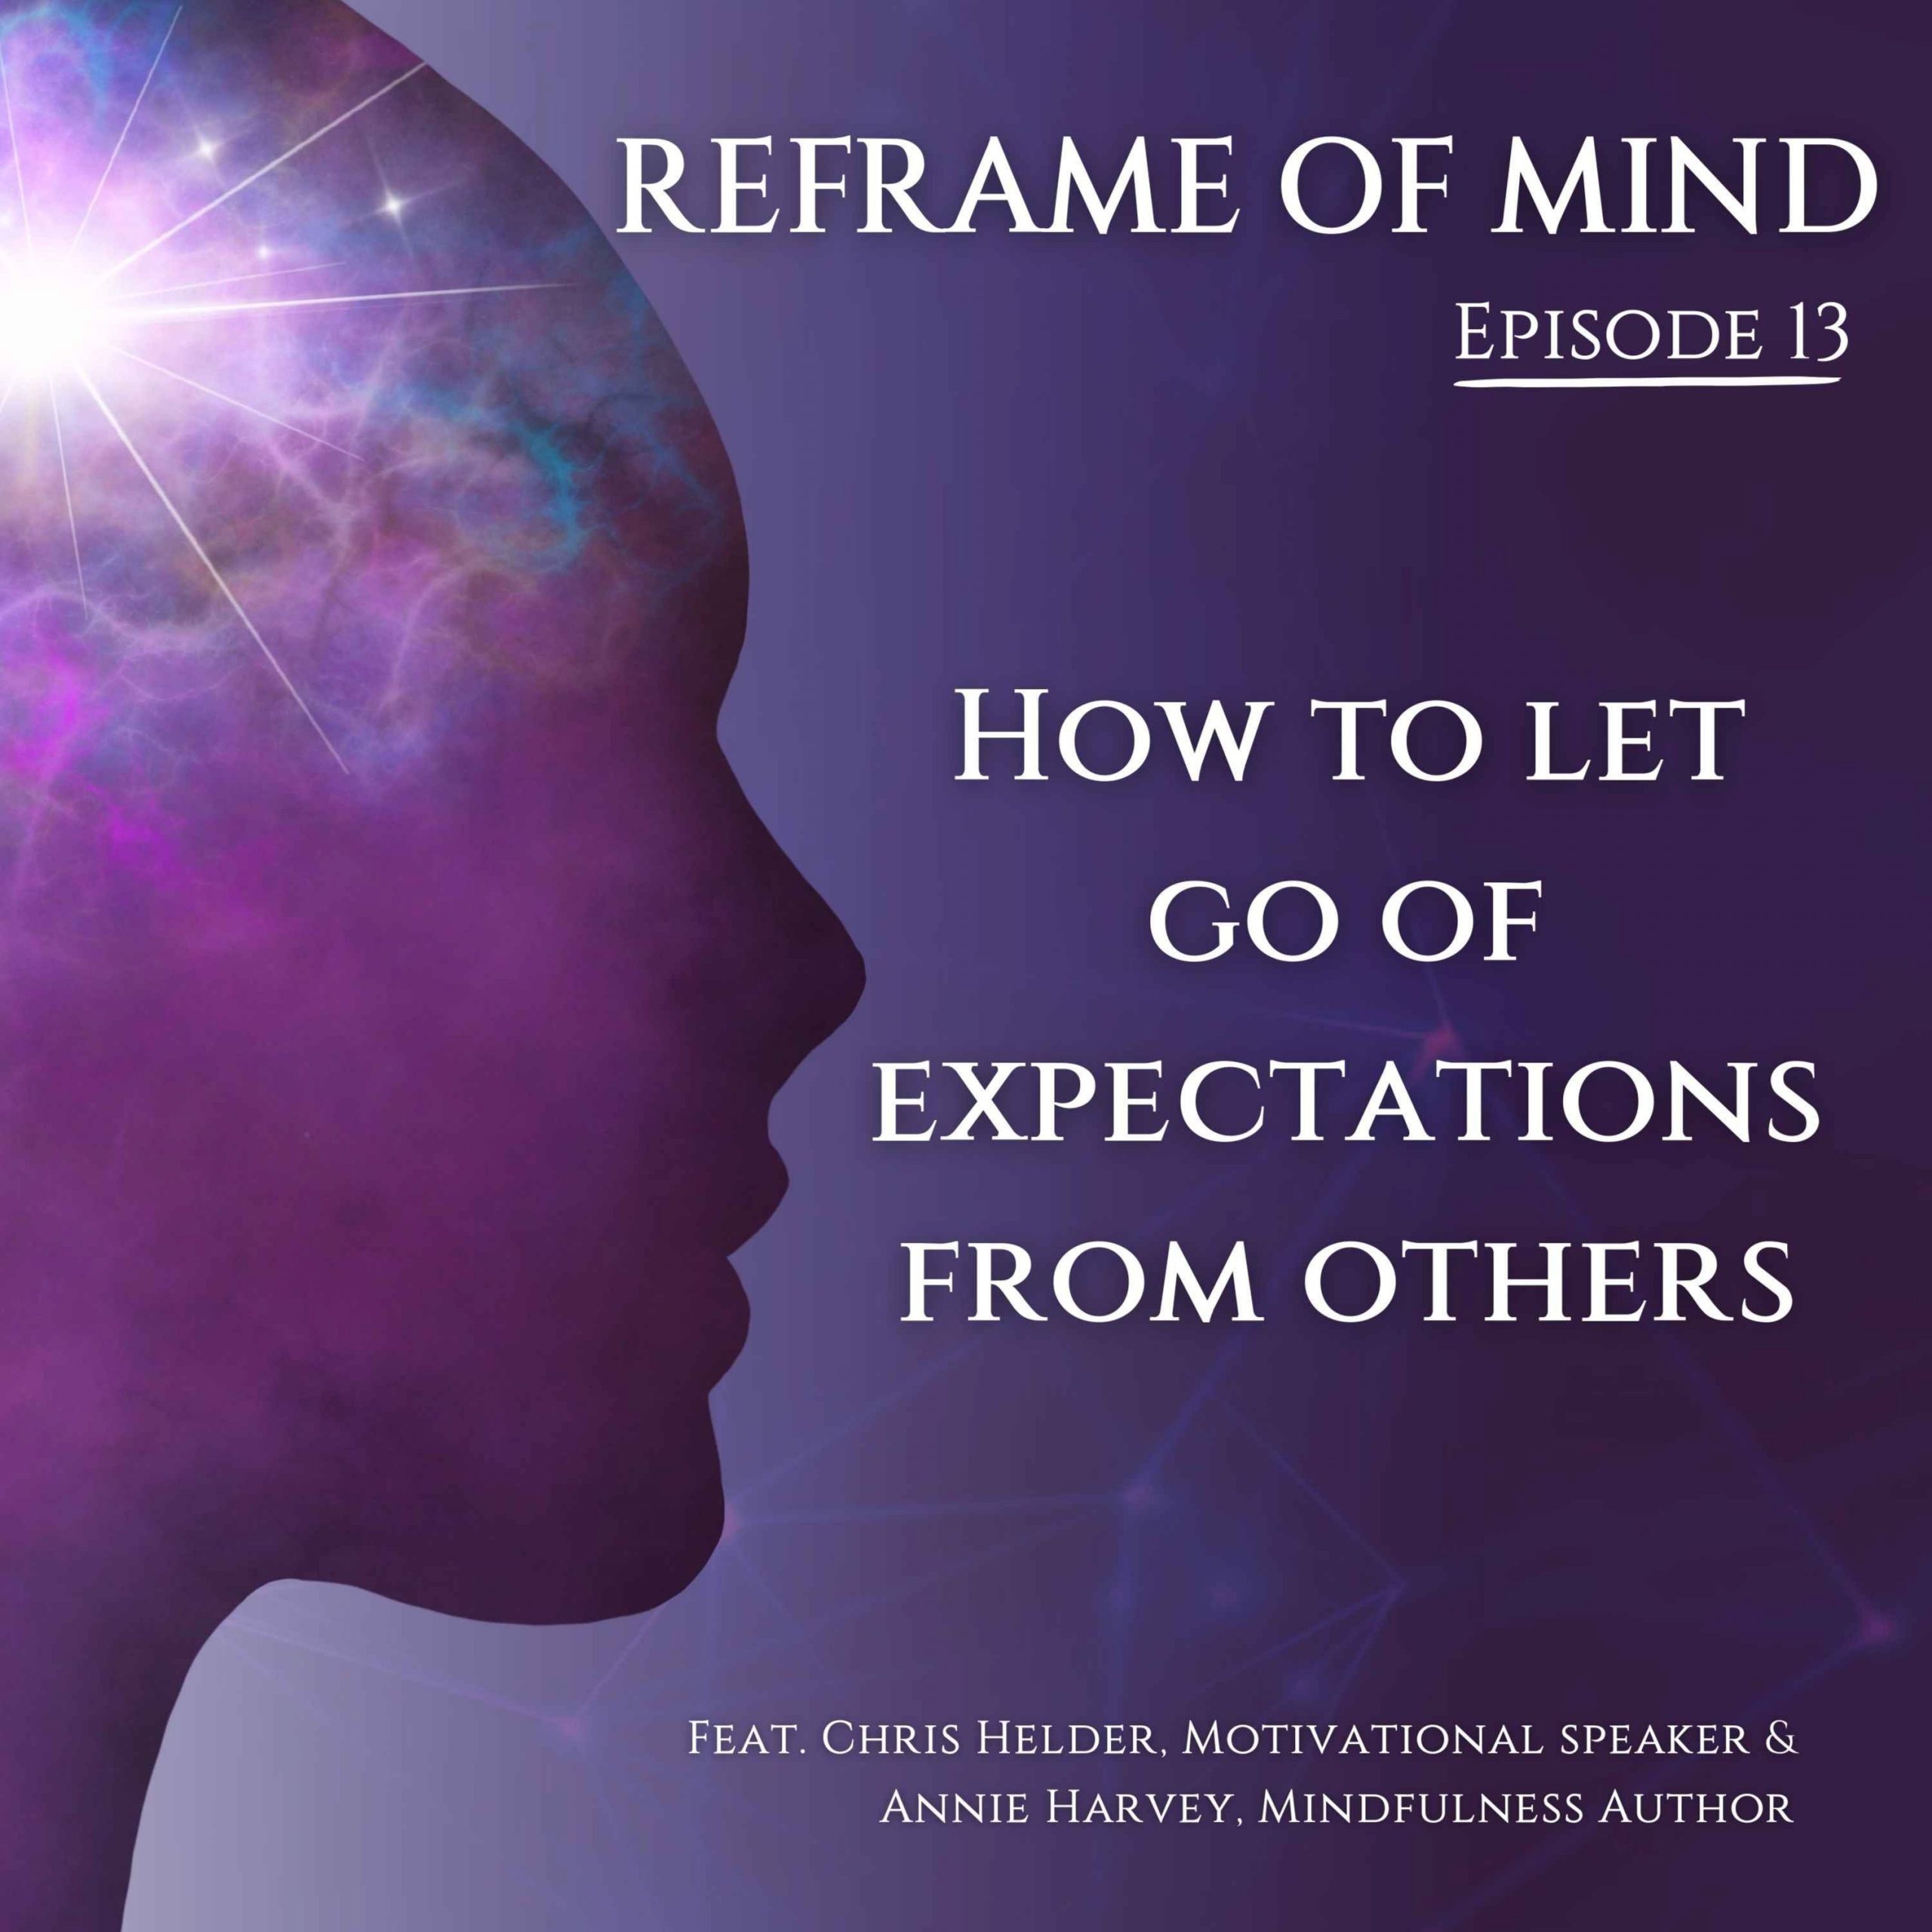 Episode 13: How to let go of expectations from others